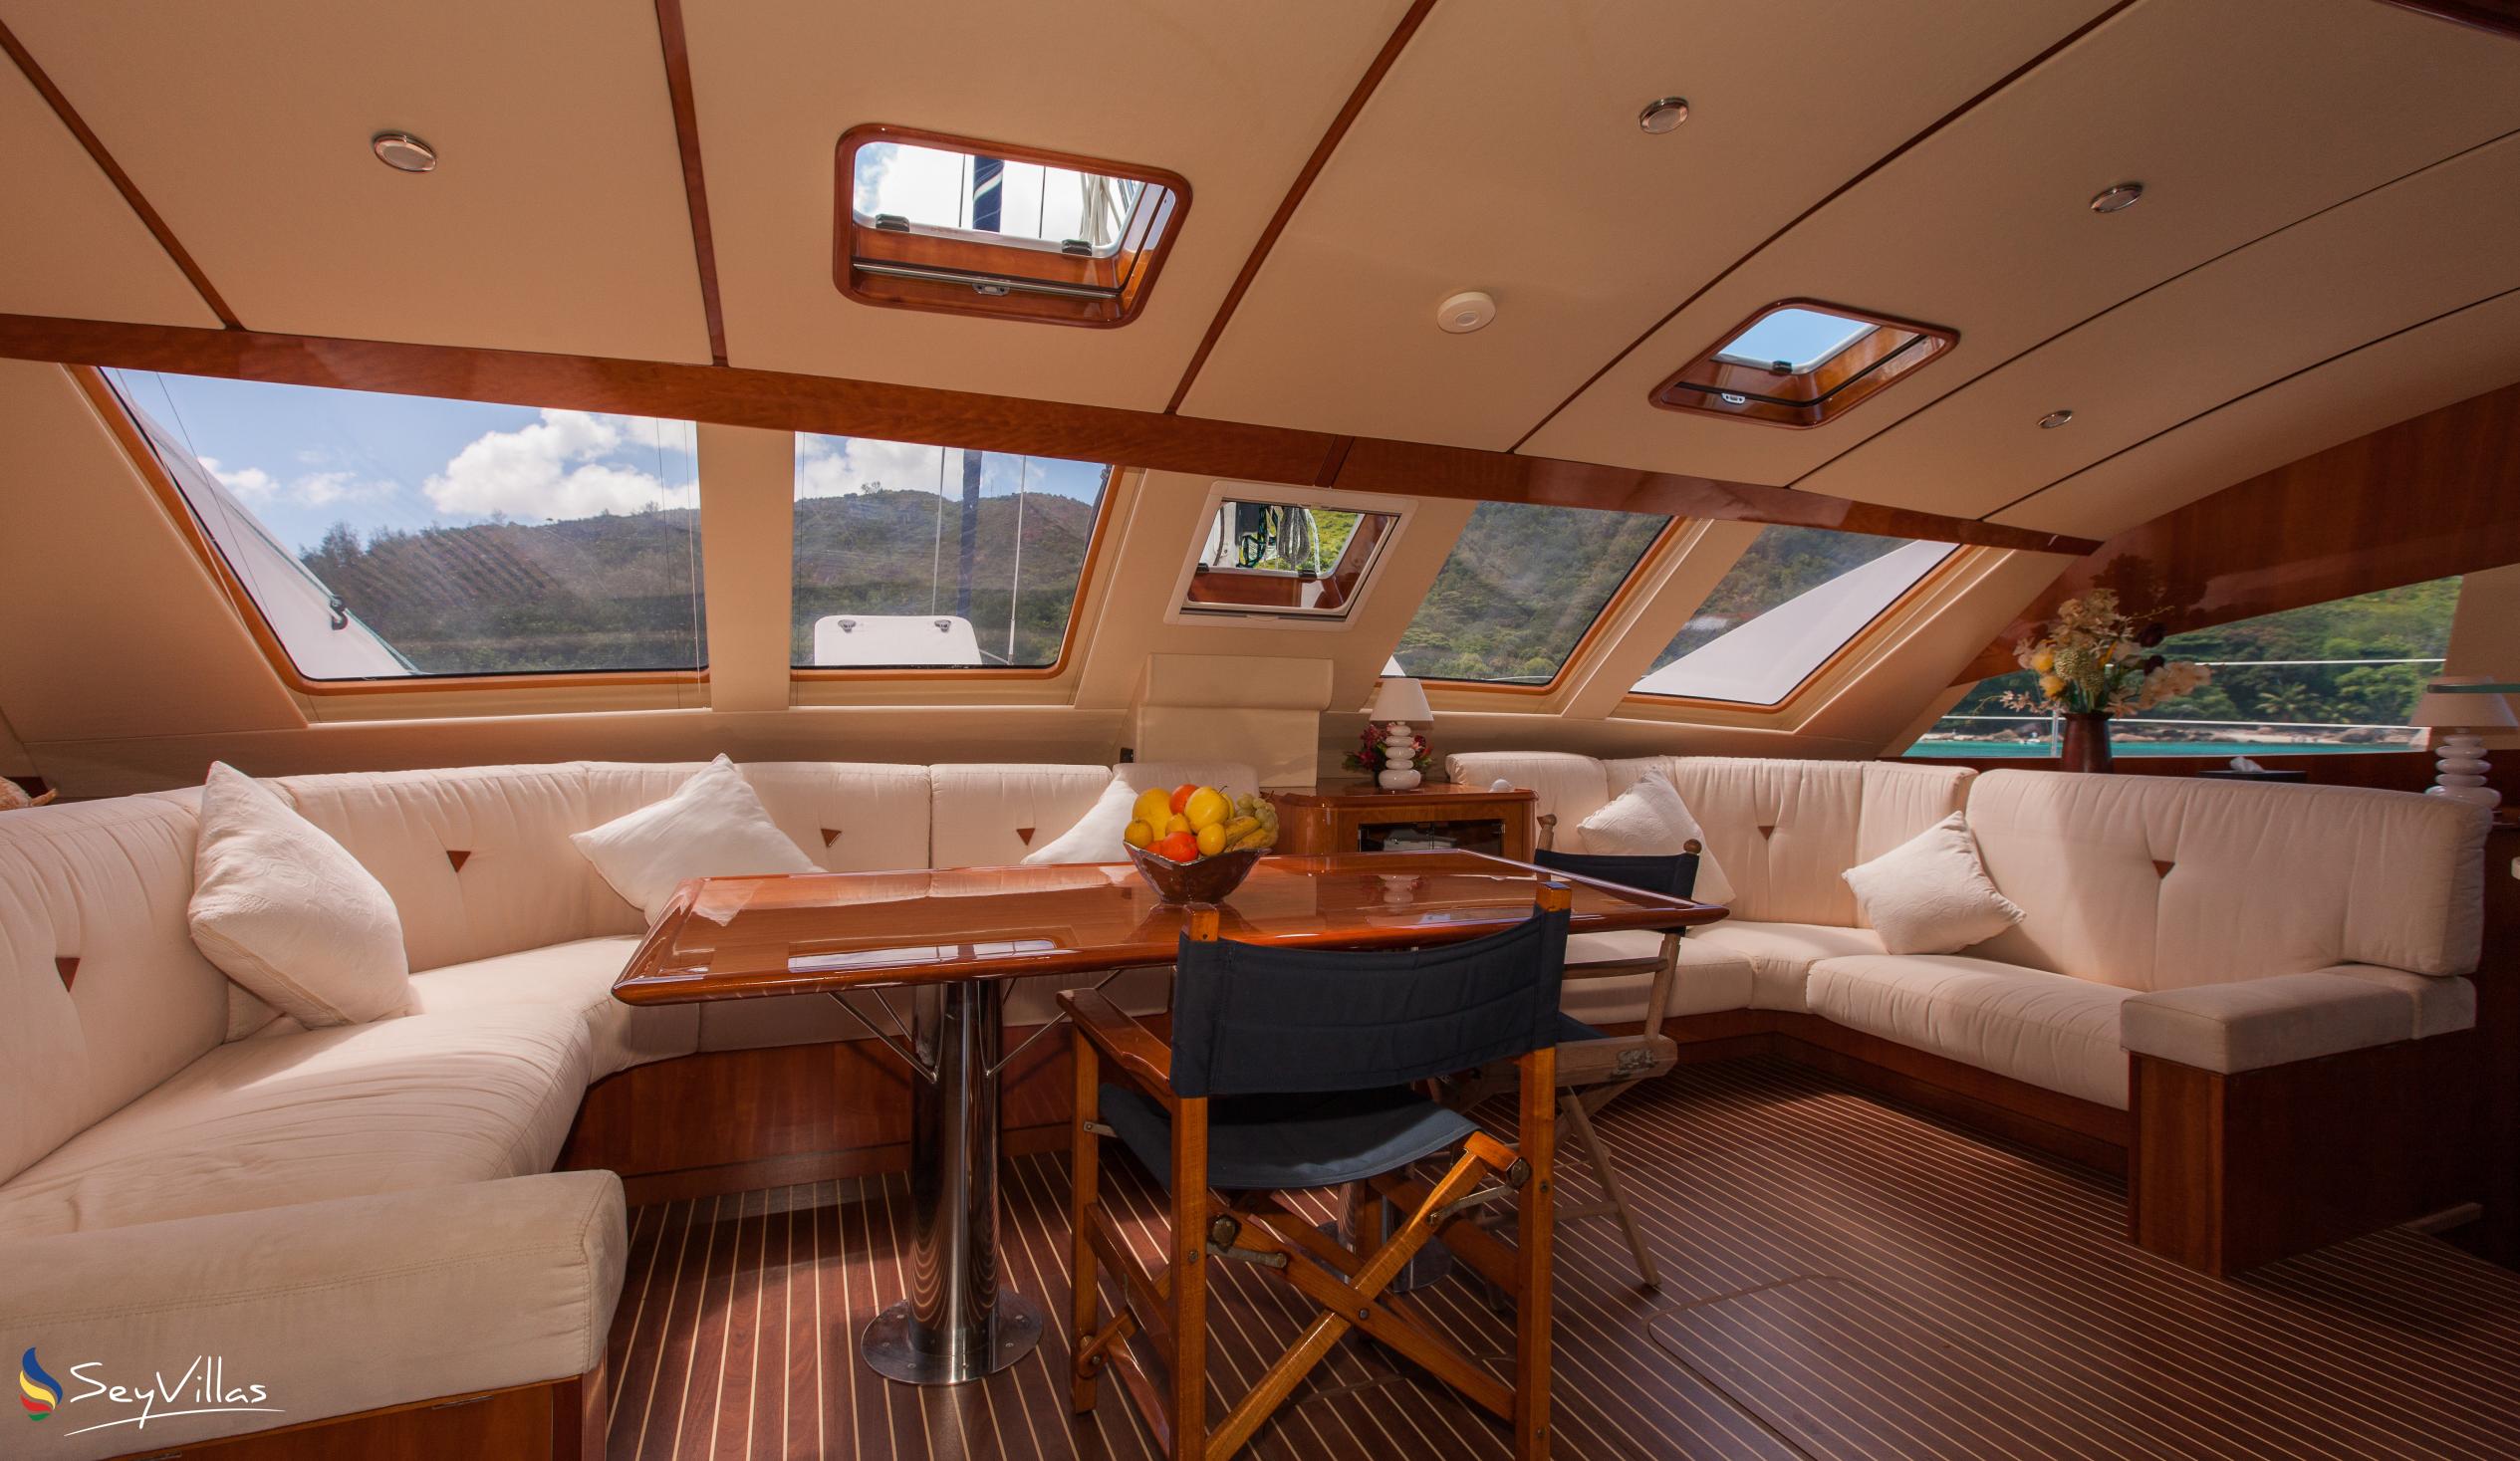 Foto 83: Seyscapes Yacht Charter - Charter completo Cirrus - Seychelles (Seychelles)